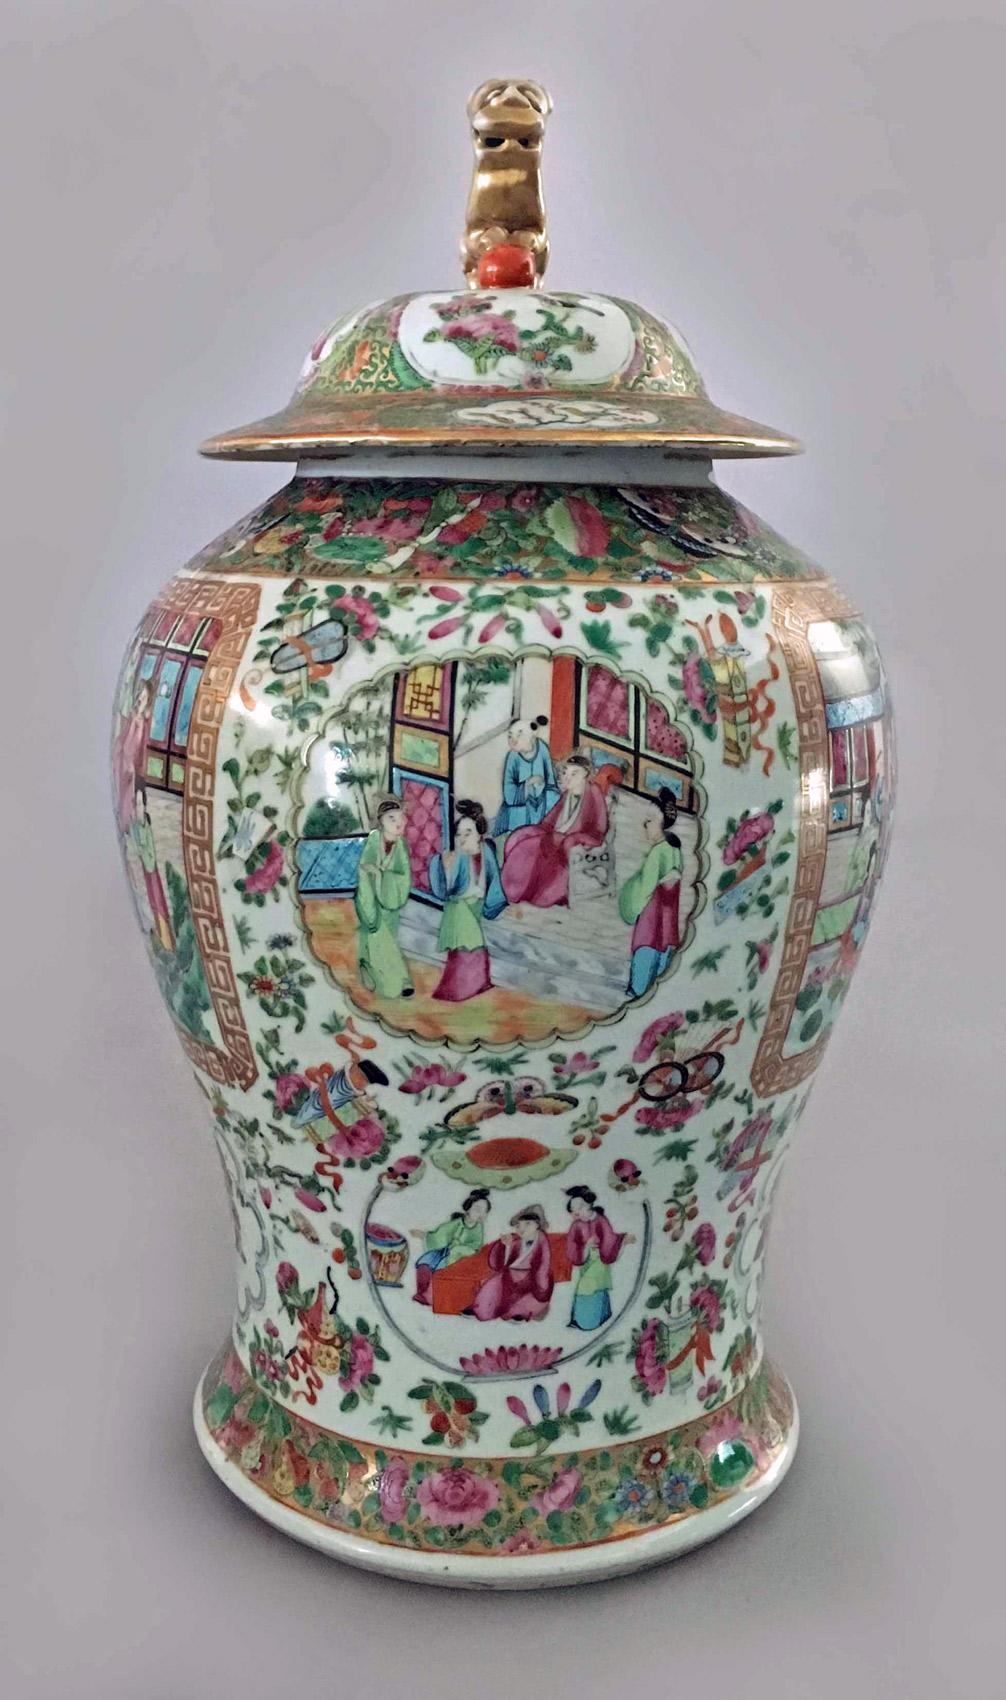 Large Chinese porcelain baluster-shaped vase with lid, decorated with two horizontal panels front and back enclosing figures in a palace scene bordered by a gilded double Greek key-like pattern, two round panels of figures with a scalloped border,